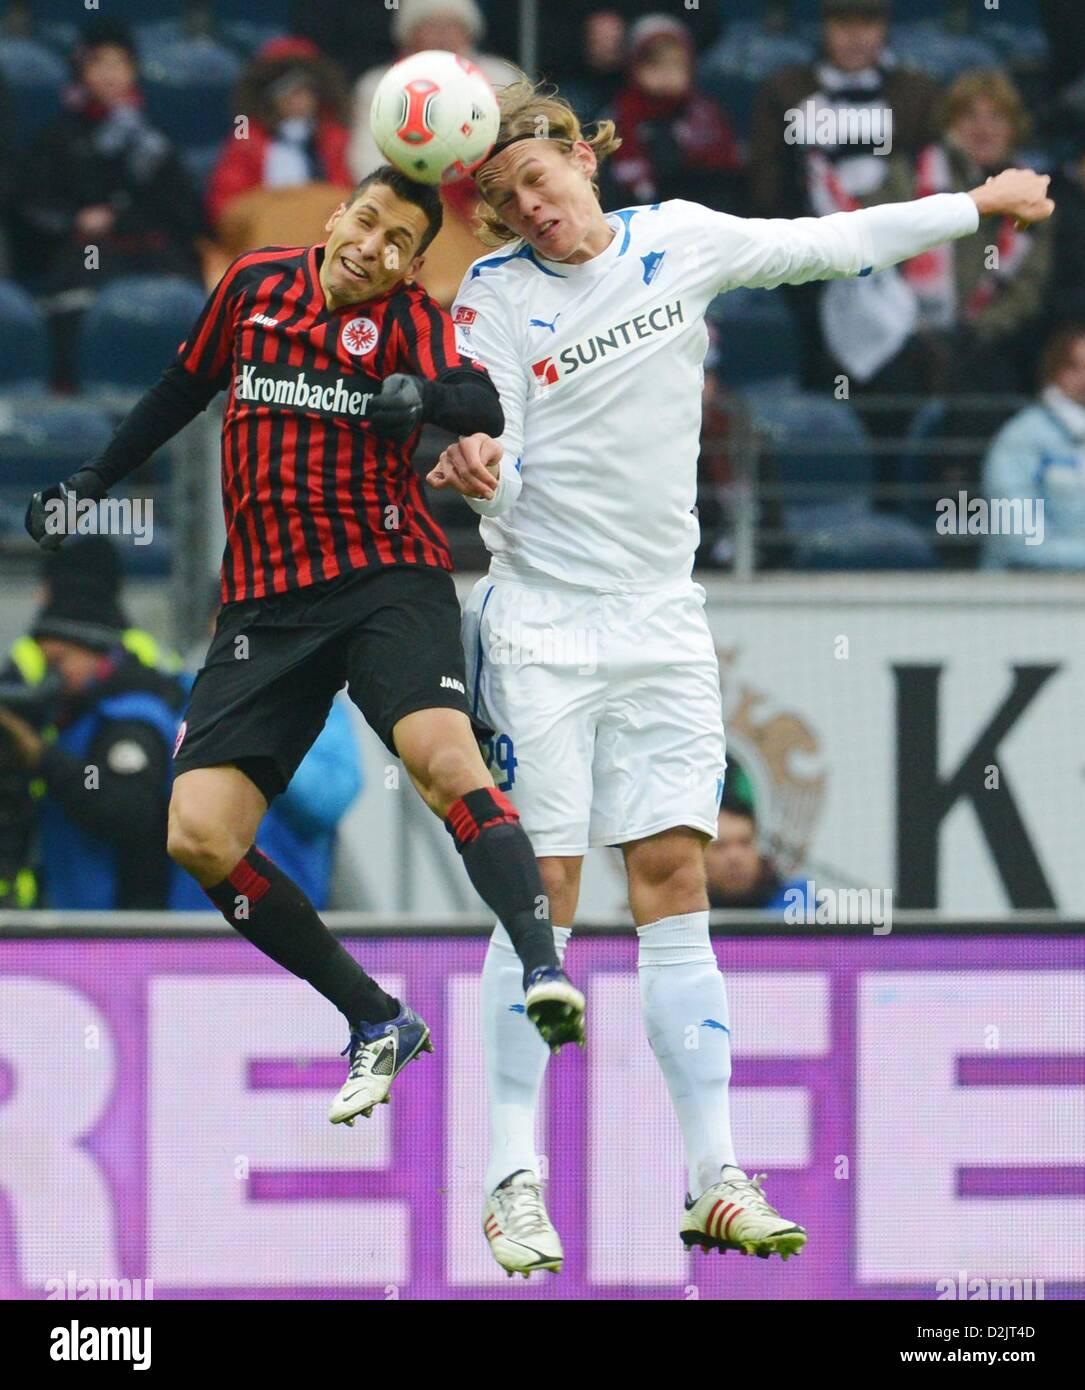 Frankfurt's Karim Matmour (L) vies for the ball with Hoffenheim's Jannik Vestergaard during the Bundelsiga soccer match between Eintracht Frankfurt and 1899 Hoffenheim at Commerzbank Arena in Frankfurt Main, Germany, 26 January 2013. Photo: BORIS ROESSLER (ATTENTION: EMBARGO CONDITIONS! The DFL permits the further utilisation of up to 15 pictures only (no sequntial pictures or video-similar series of pictures allowed) via the internet and online media during the match (including halftime), taken from inside the stadium and/or prior to the start of the match. The DFL permits the unrestricted tr Stock Photo